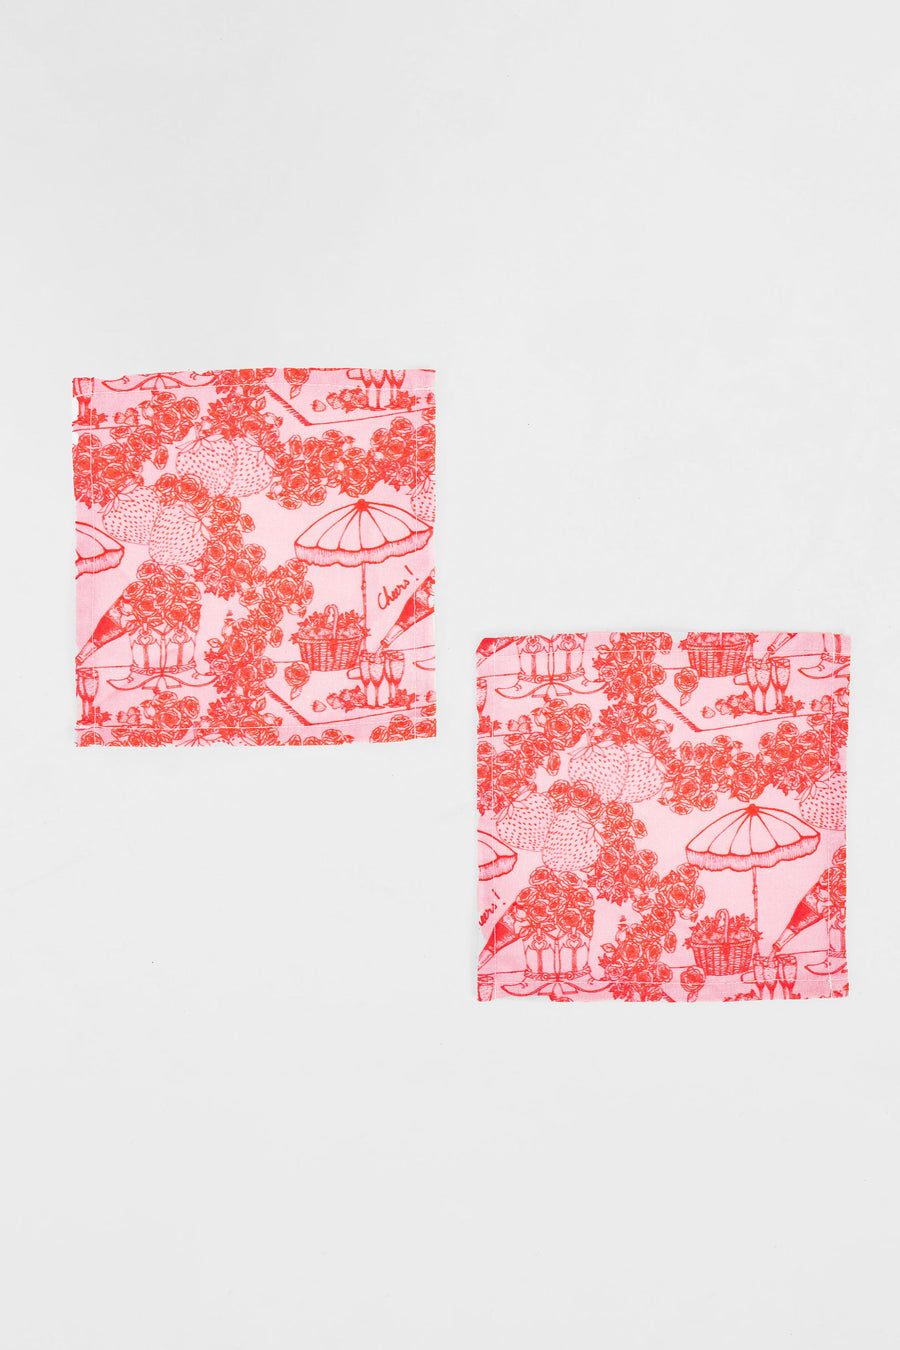 COCKTAIL NAPKIN SET PINK & RED PICNIC TOILE *LIMITED*EDITION*